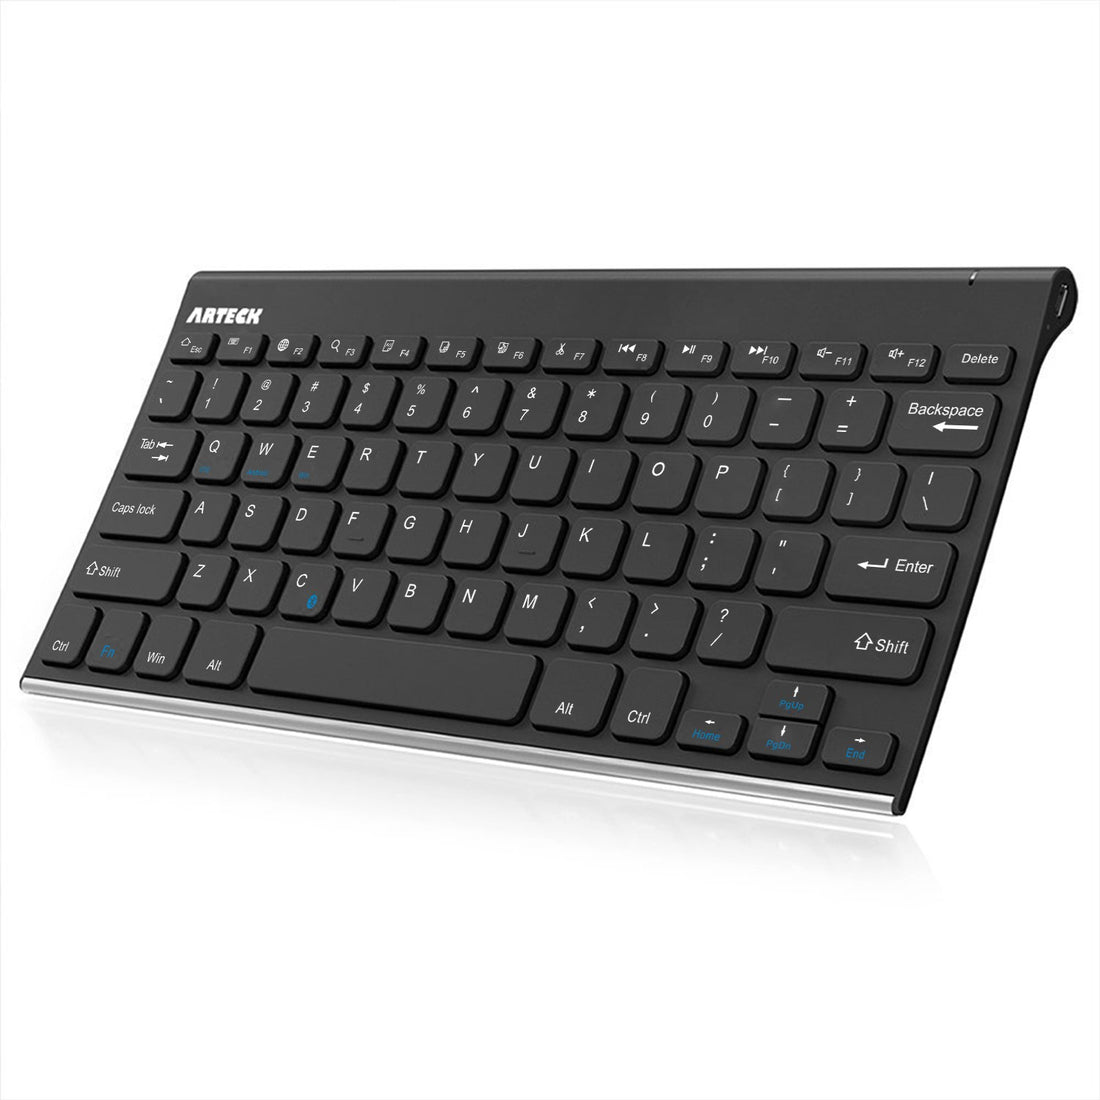 Arteck Stainless Steel Universal Portable Wireless Bluetooth Keyboard for iOS, Android, Windows Tablet PC Smartphone Built in Rechargeable 6 Month Battery